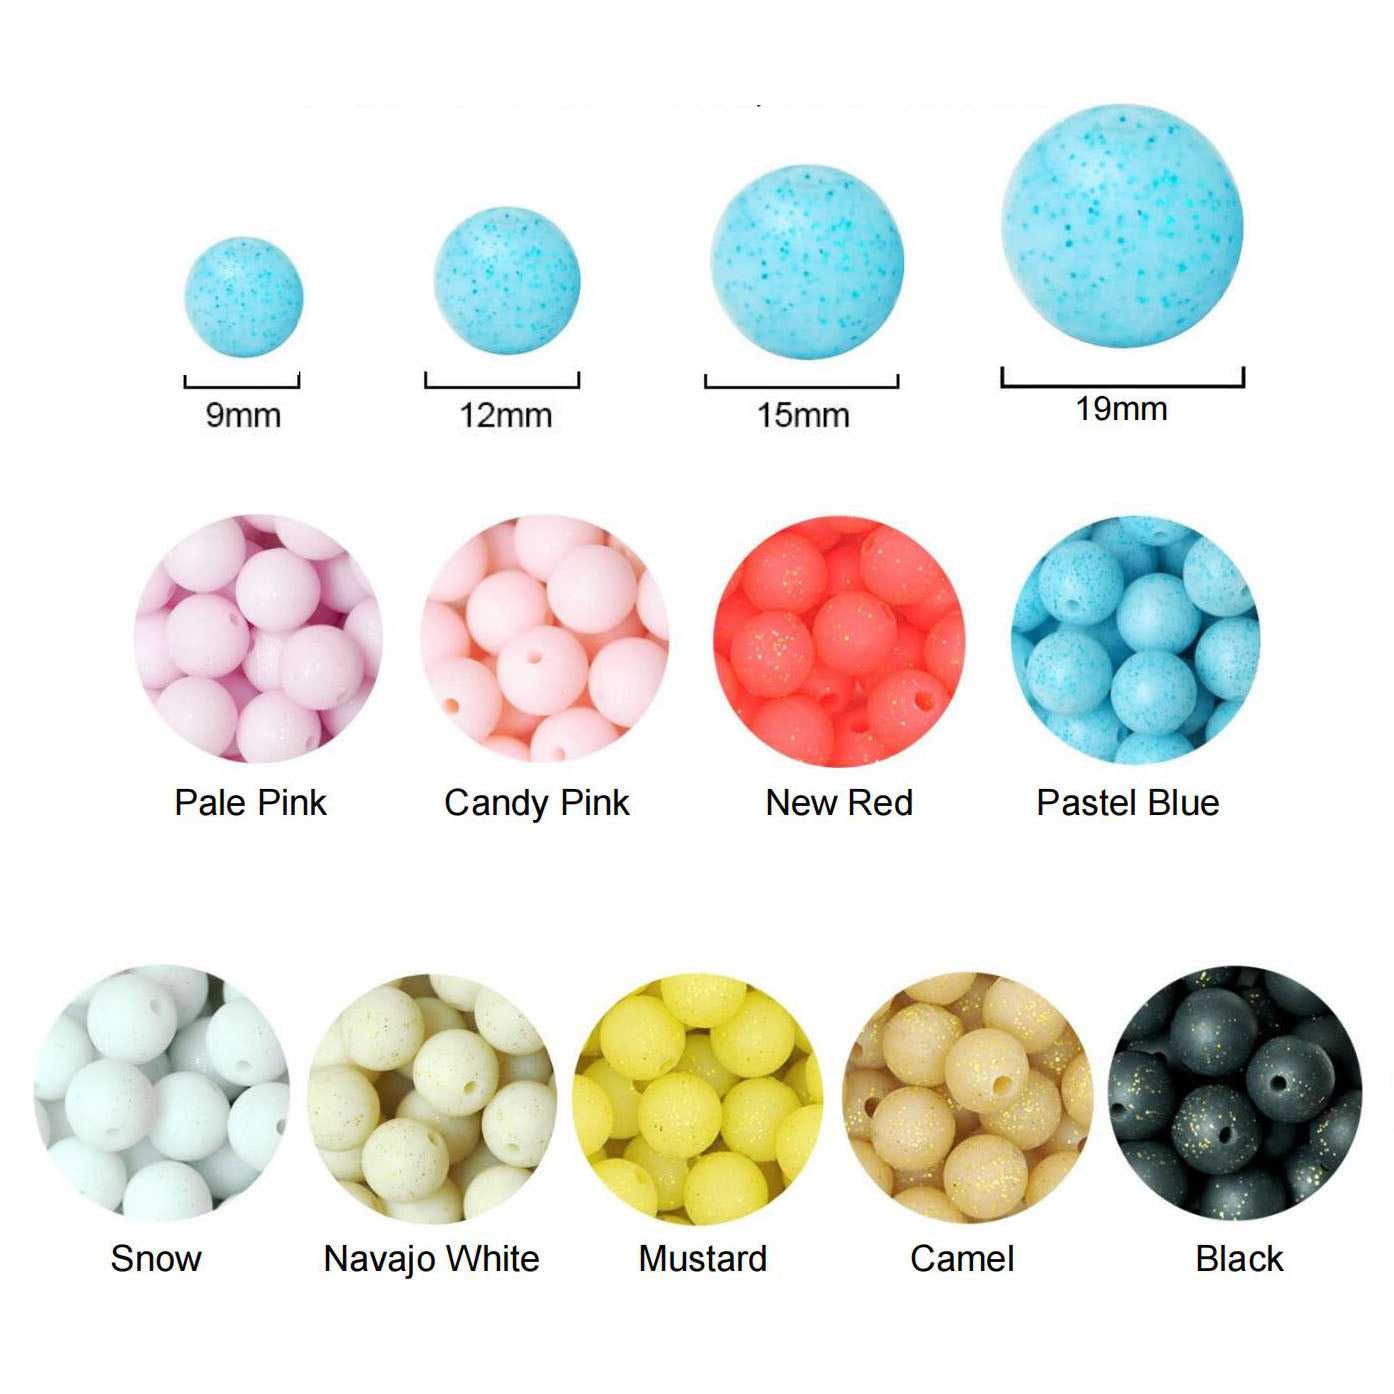 New Colors 100Pcs/Lot 12mm Silicone Beads Focal Baby Teething